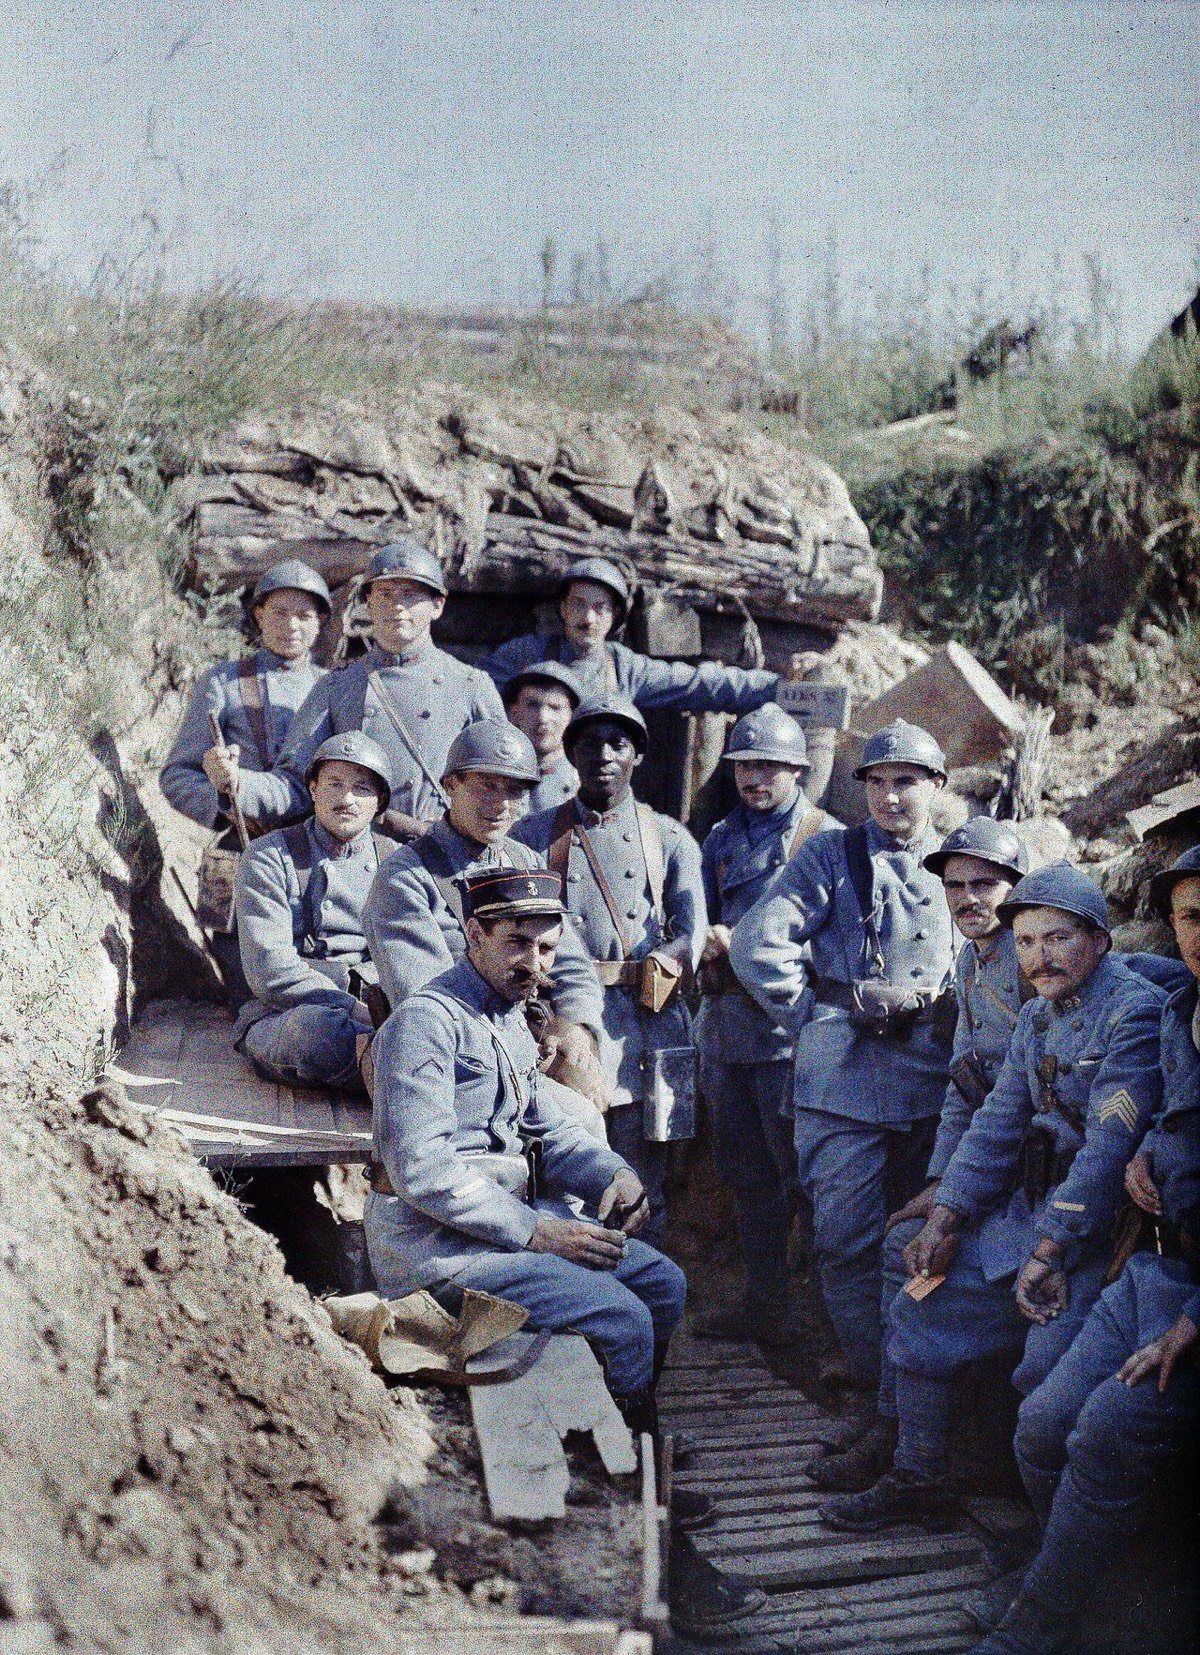 The color photographs of World War I